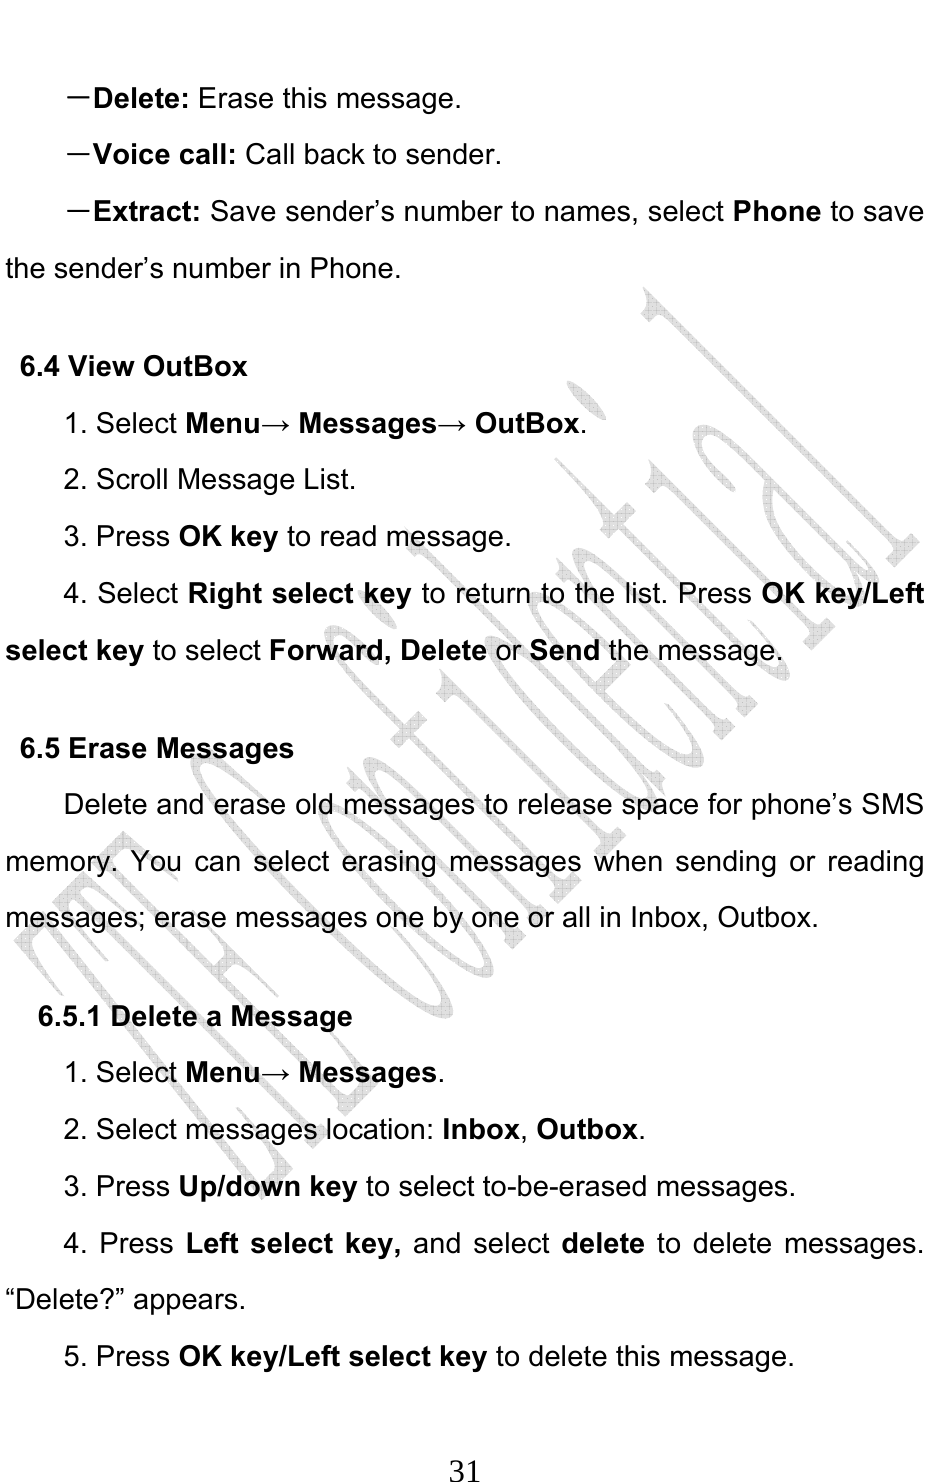                              31－Delete: Erase this message. －Voice call: Call back to sender. －Extract: Save sender’s number to names, select Phone to save the sender’s number in Phone. 6.4 View OutBox 1. Select Menu→ Messages→ OutBox. 2. Scroll Message List. 3. Press OK key to read message.   4. Select Right select key to return to the list. Press OK key/Left select key to select Forward, Delete or Send the message. 6.5 Erase Messages   Delete and erase old messages to release space for phone’s SMS memory. You can select erasing messages when sending or reading messages; erase messages one by one or all in Inbox, Outbox.   6.5.1 Delete a Message 1. Select Menu→ Messages. 2. Select messages location: Inbox, Outbox.  3. Press Up/down key to select to-be-erased messages. 4. Press Left select key, and select delete to delete messages. “Delete?” appears. 5. Press OK key/Left select key to delete this message. 